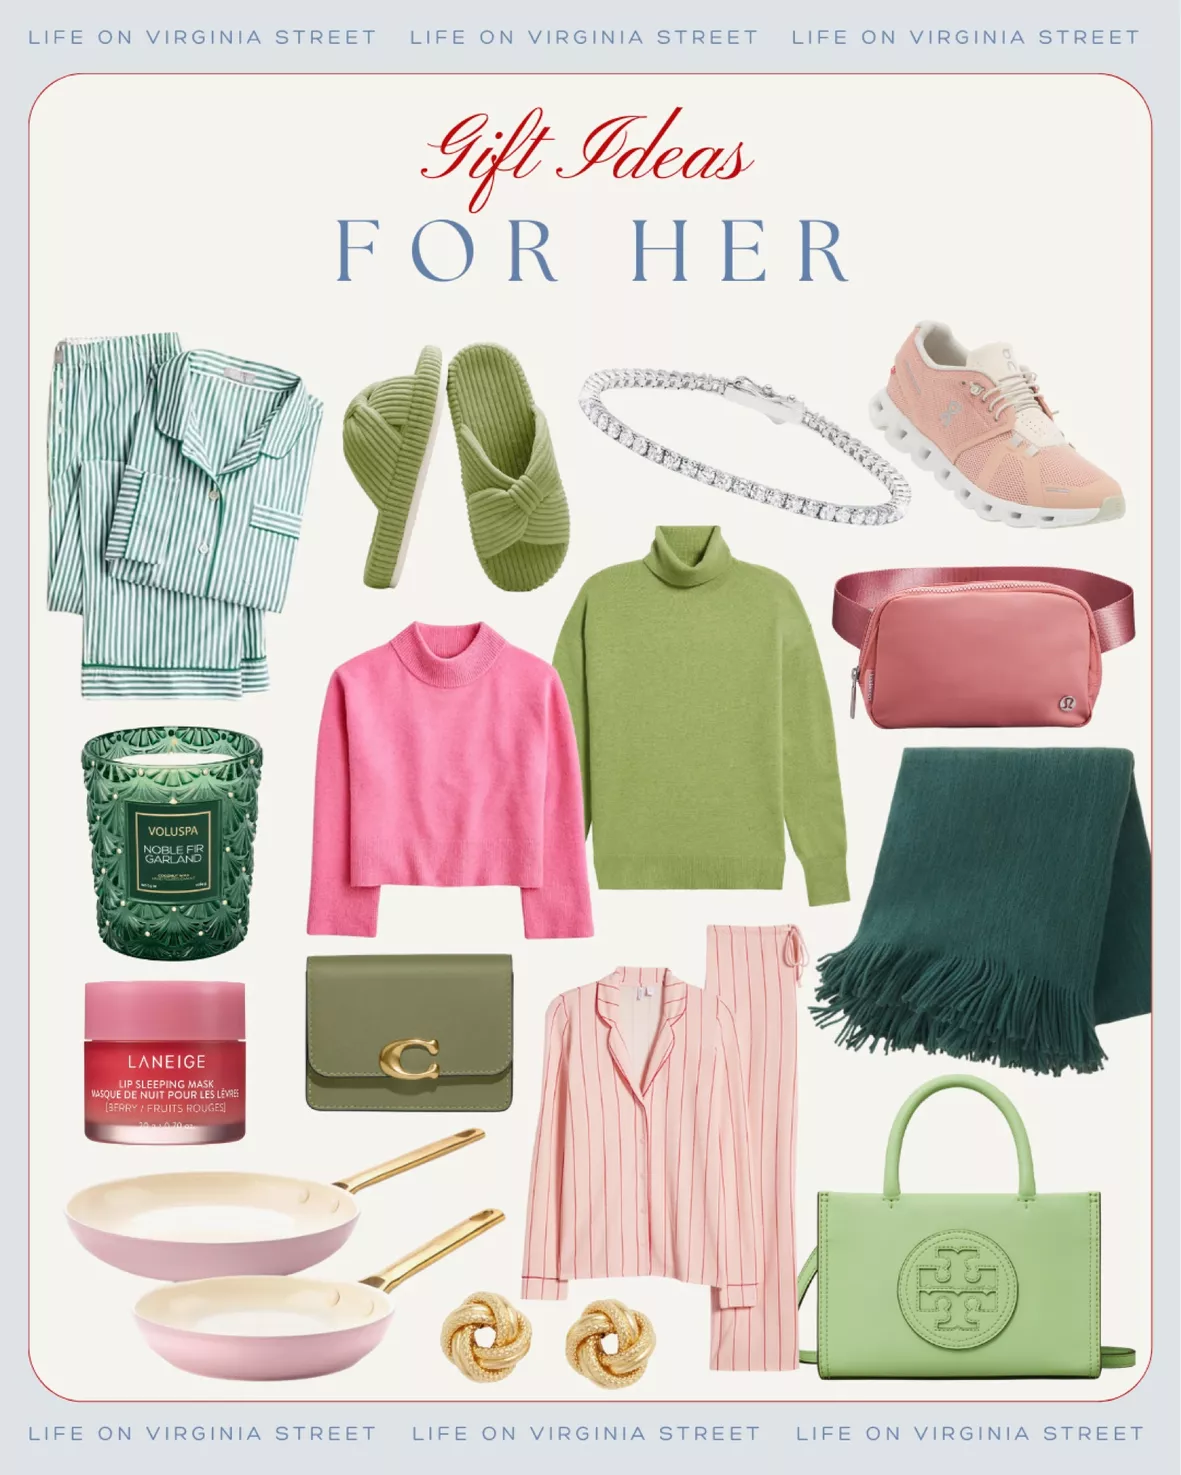 Gift Ideas For Her - Life On Virginia Street